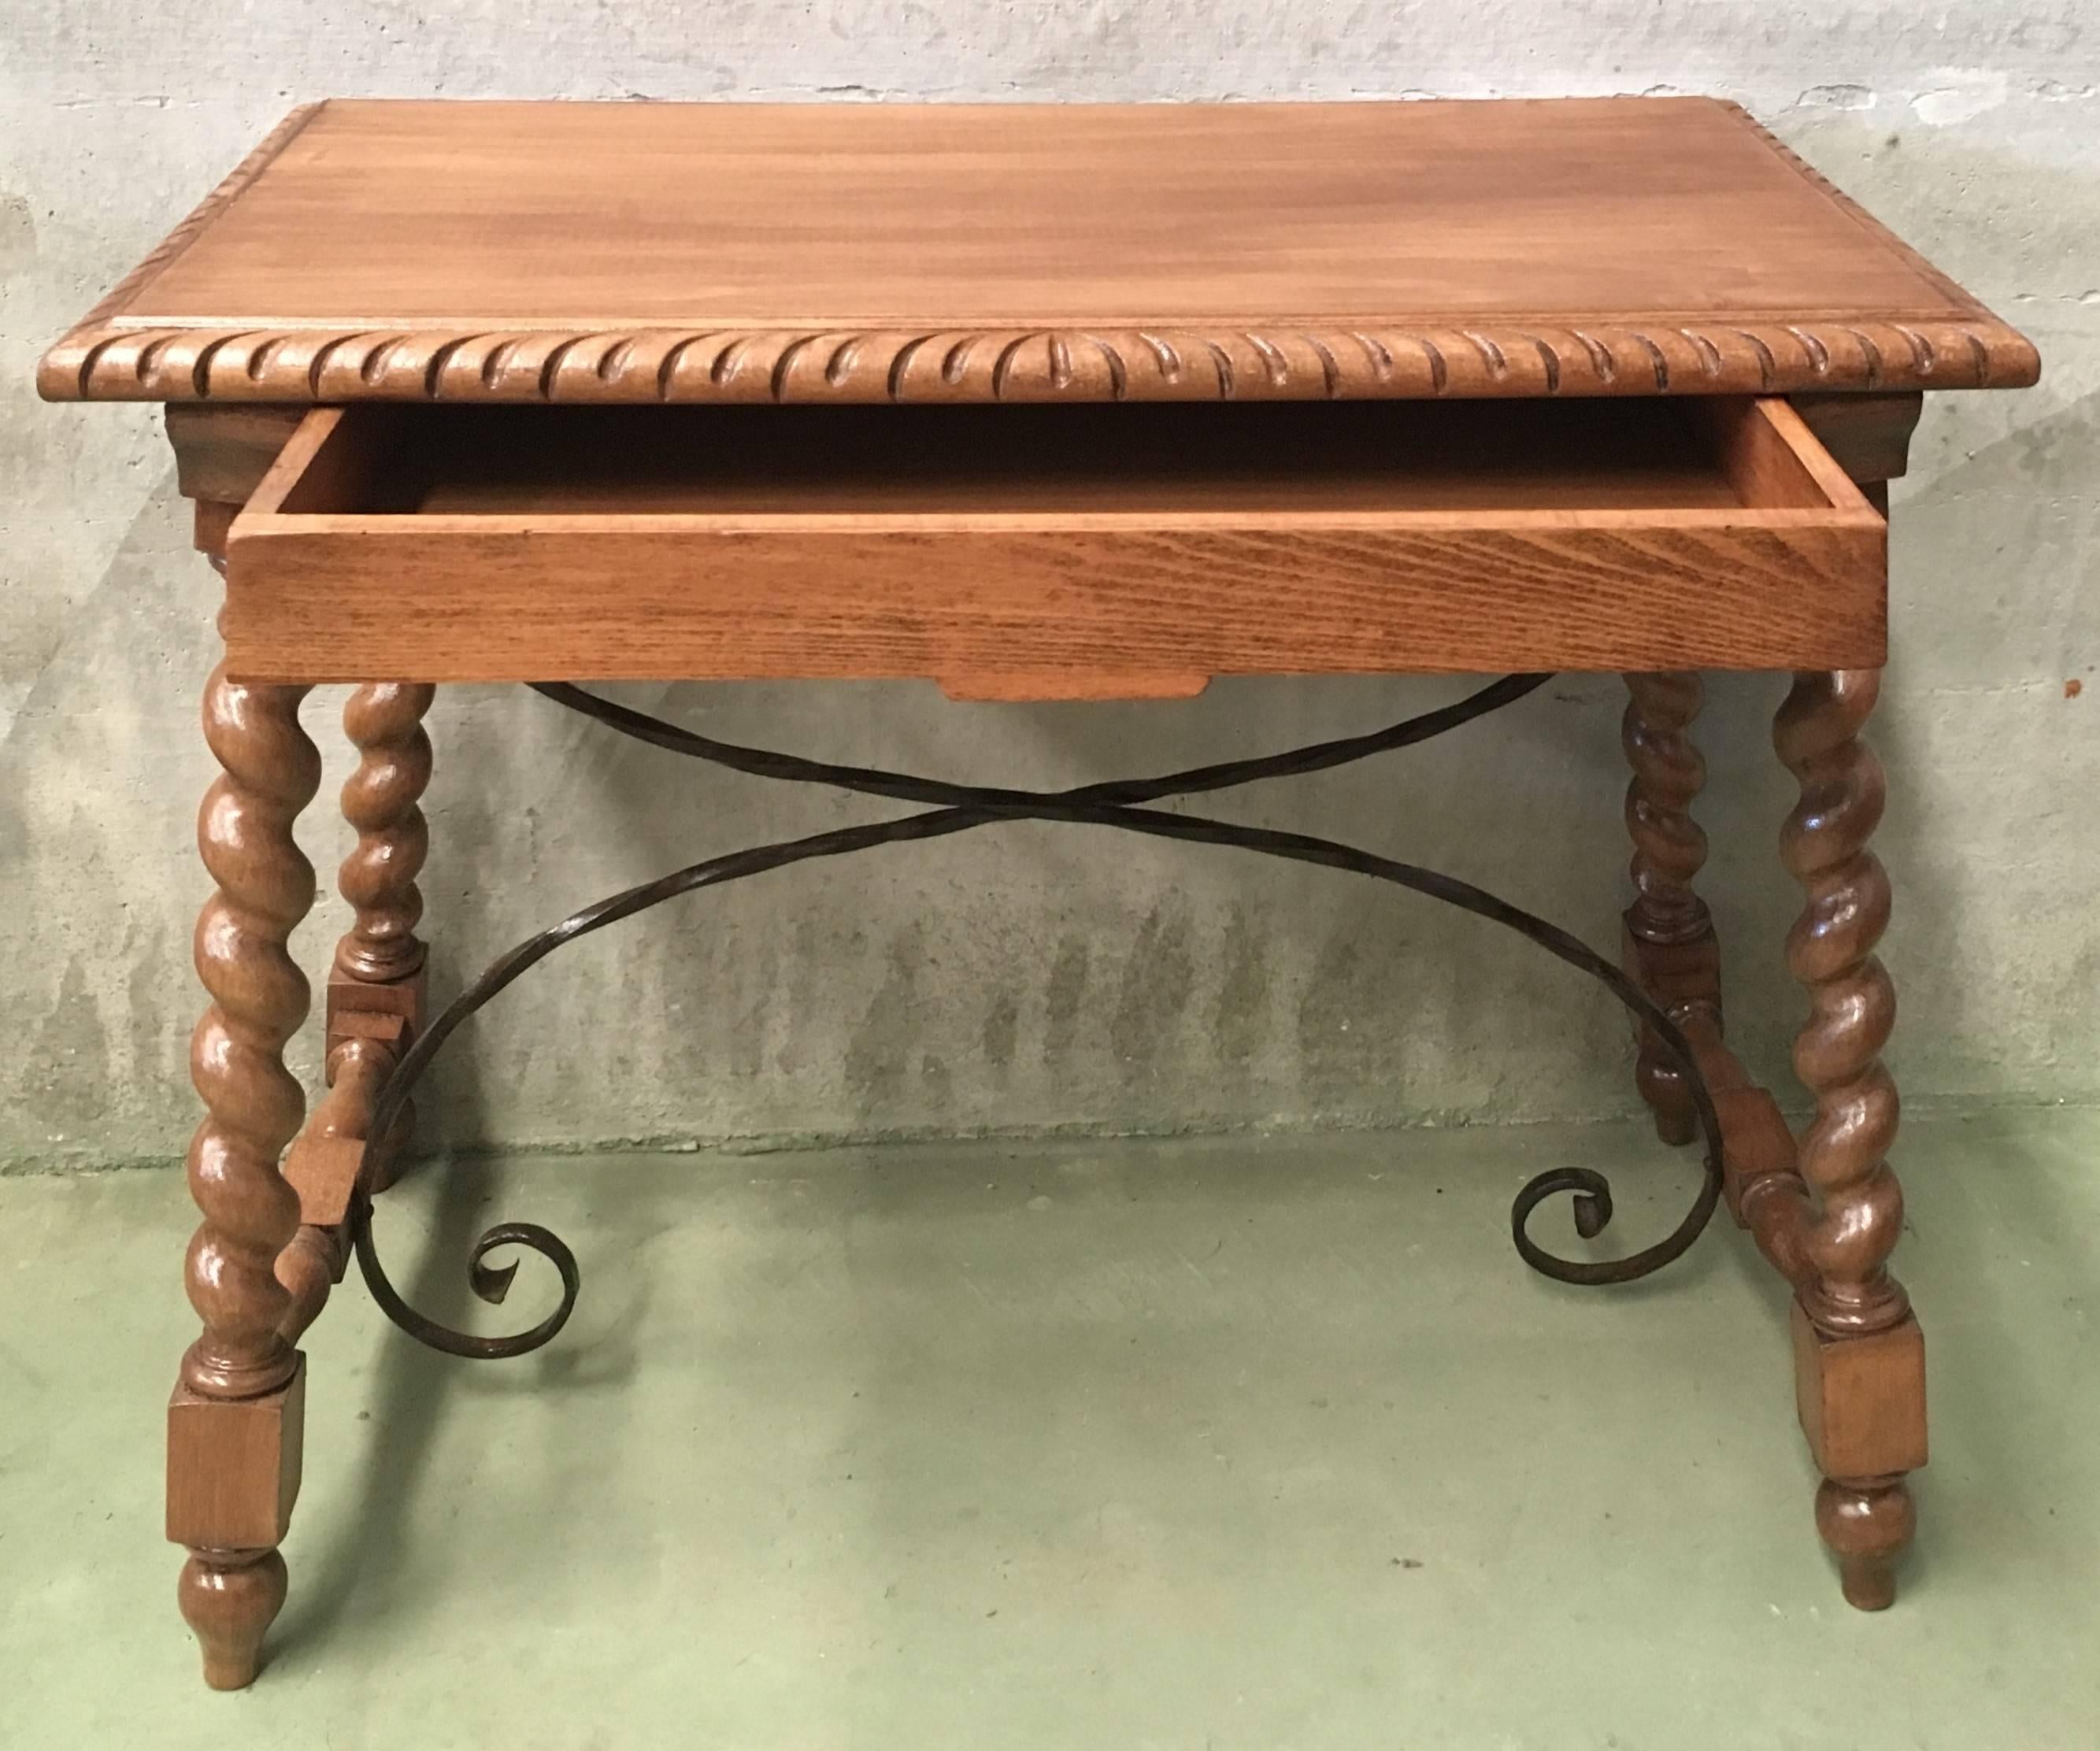 Spanish Colonial 19th Spanish Farm Table with Iron Stretchers, Hand-Carved Top and Drawer